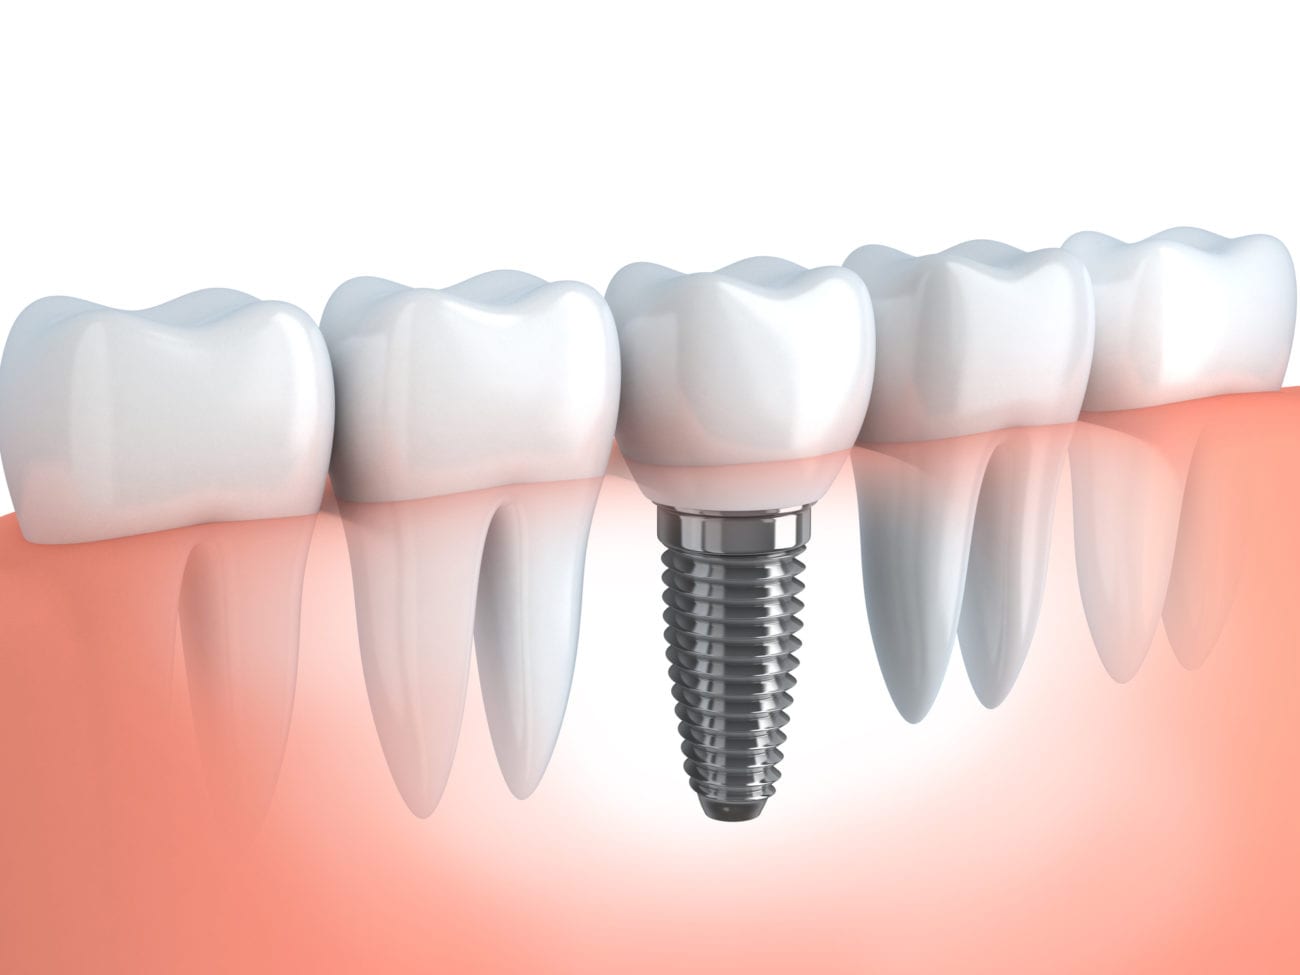 Dental Implants for missing teeth in Plano Texas